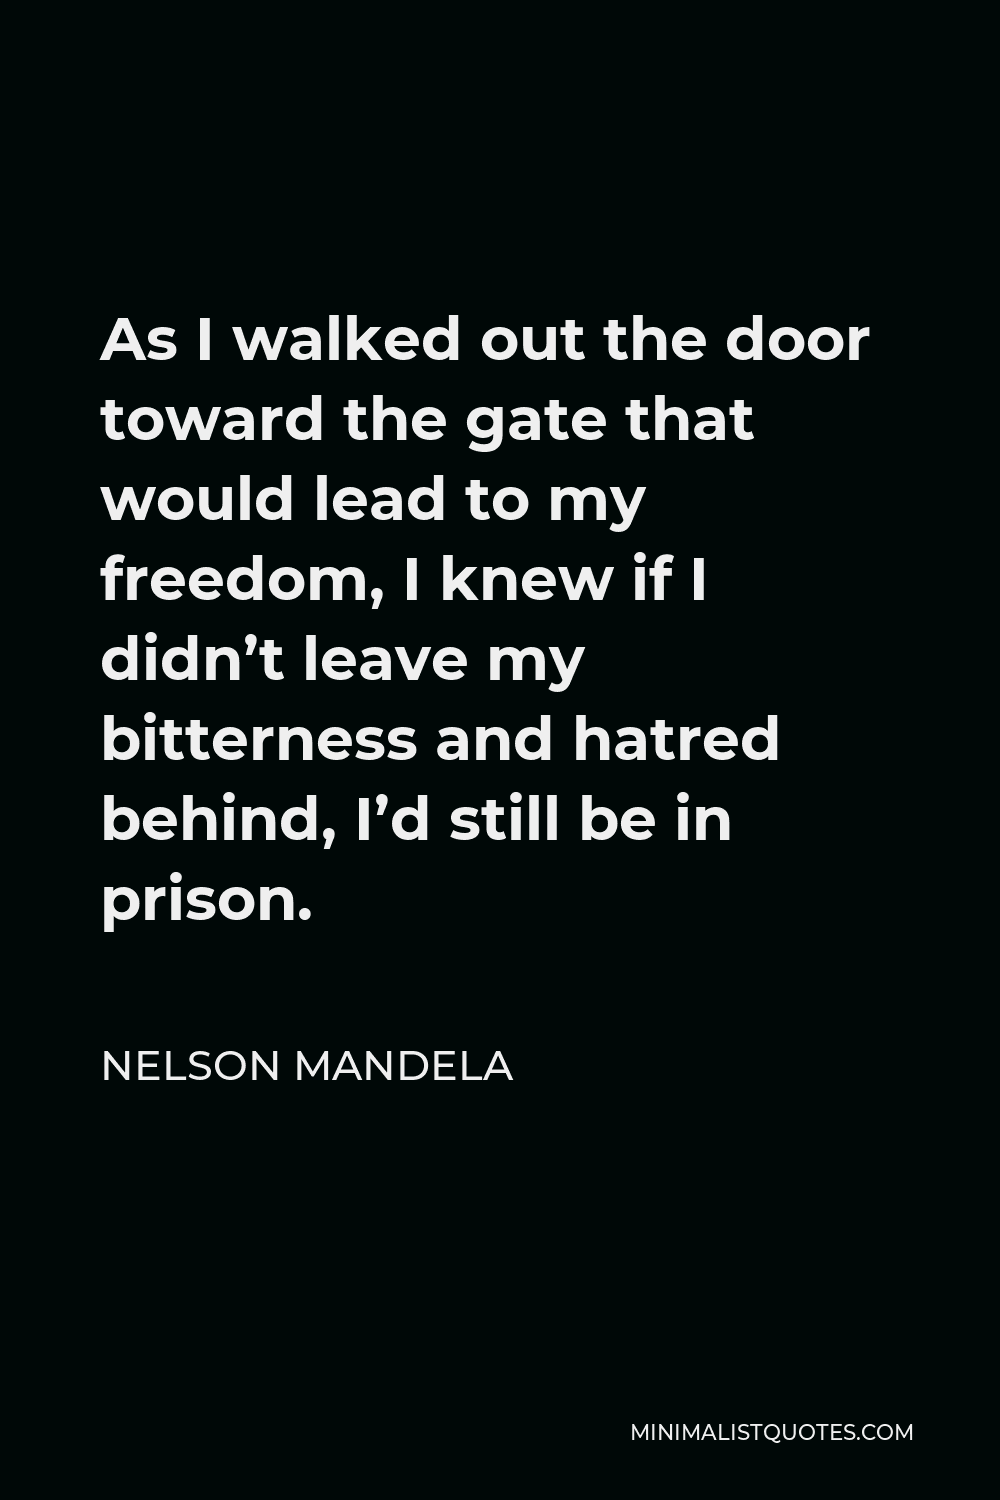 Nelson Mandela Quote: As I walked out the door toward the gate that would lead to my freedom, I knew if I didn't leave my bitterness and hatred behind, I'd still be in prison.